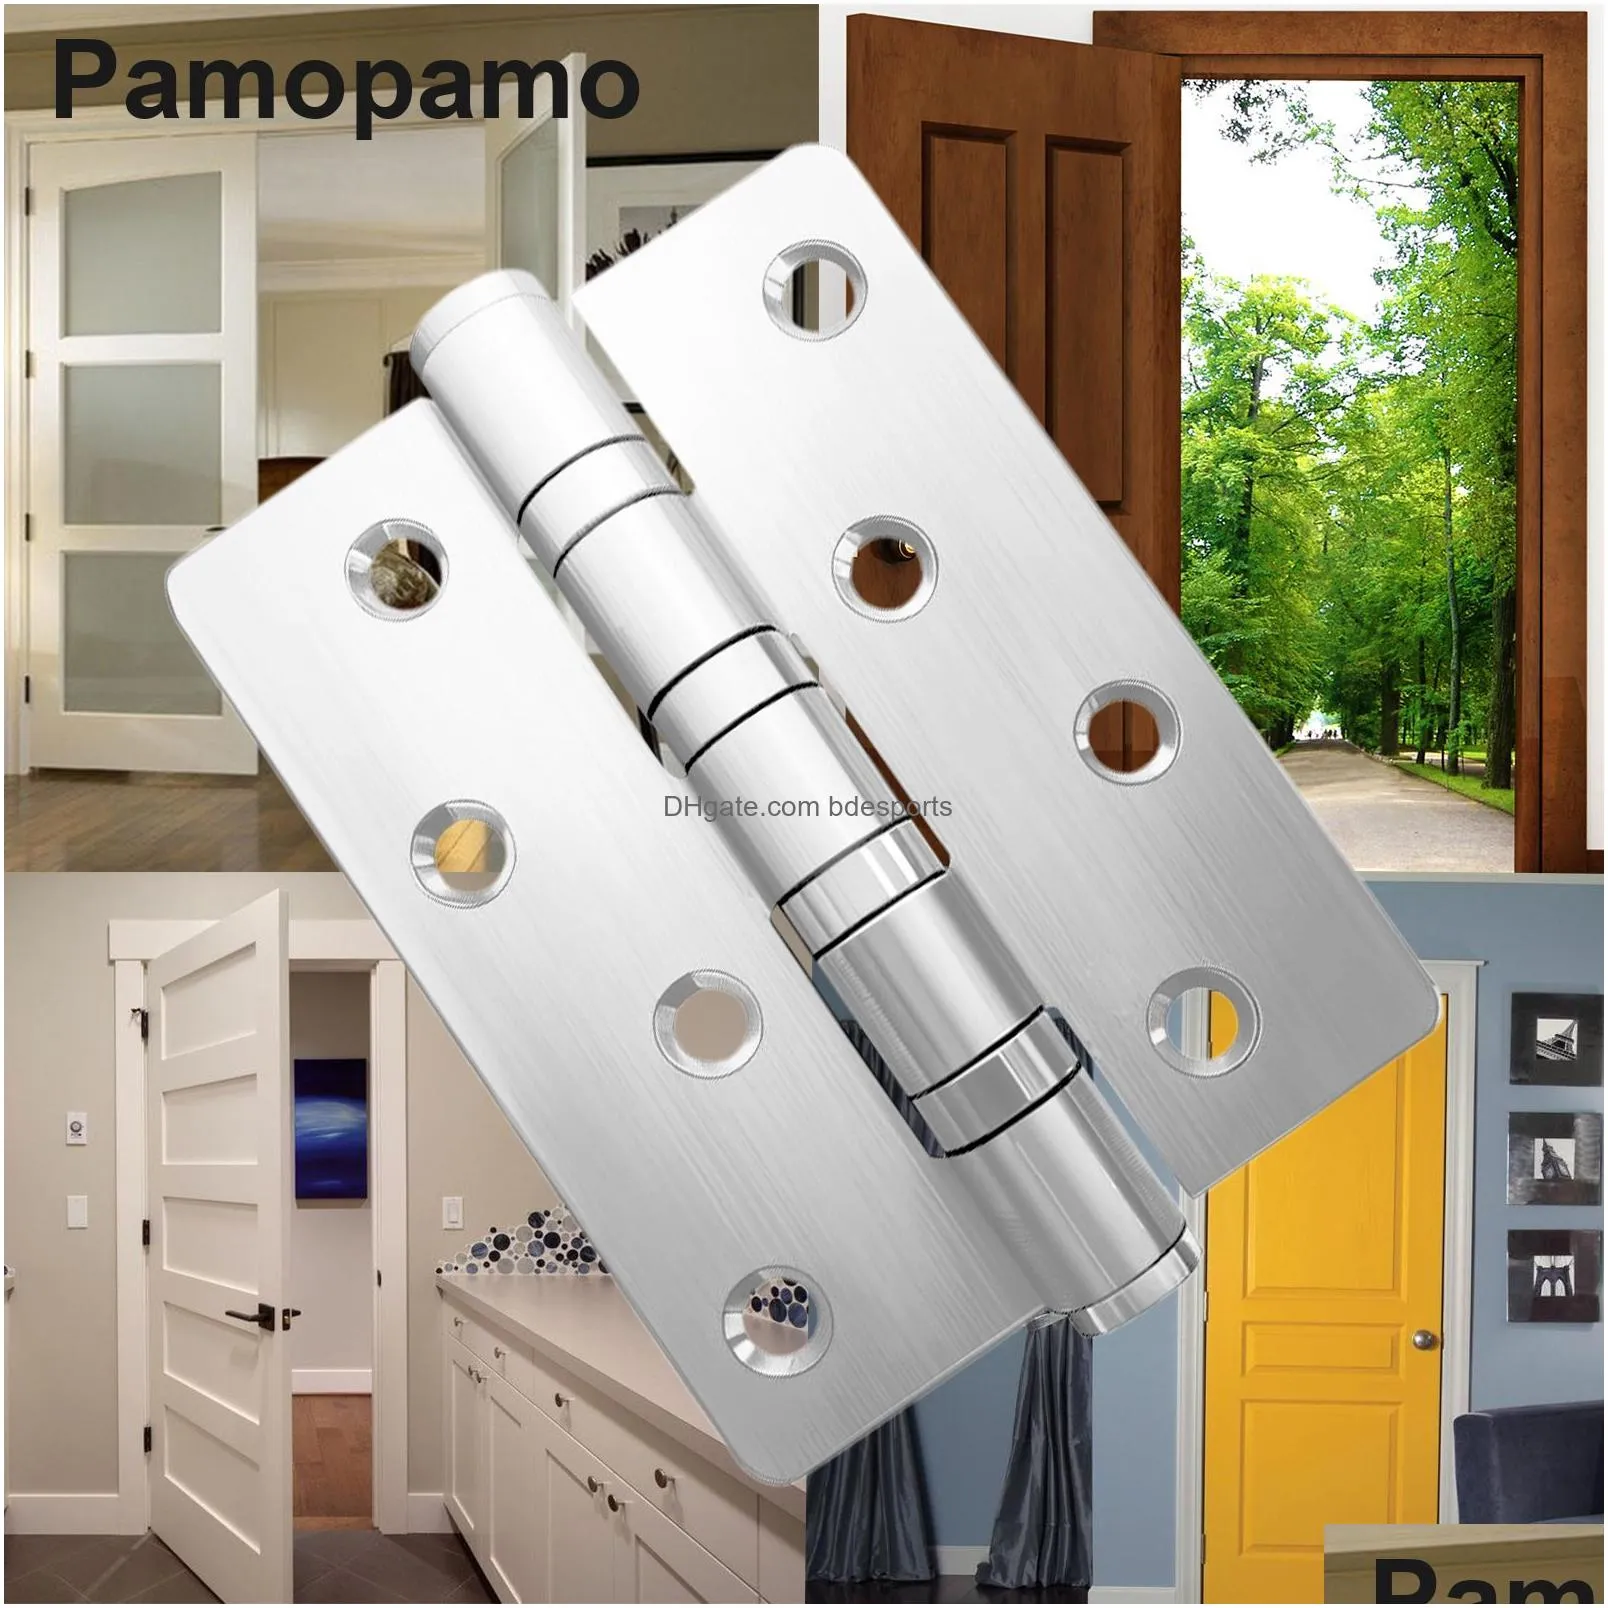 Other Door Hardware Superior Quality Door Hinge Heavy-Duty Stainless Steel Hardware For Smooth And Silent Movement In Residential Comm Dh8Ub